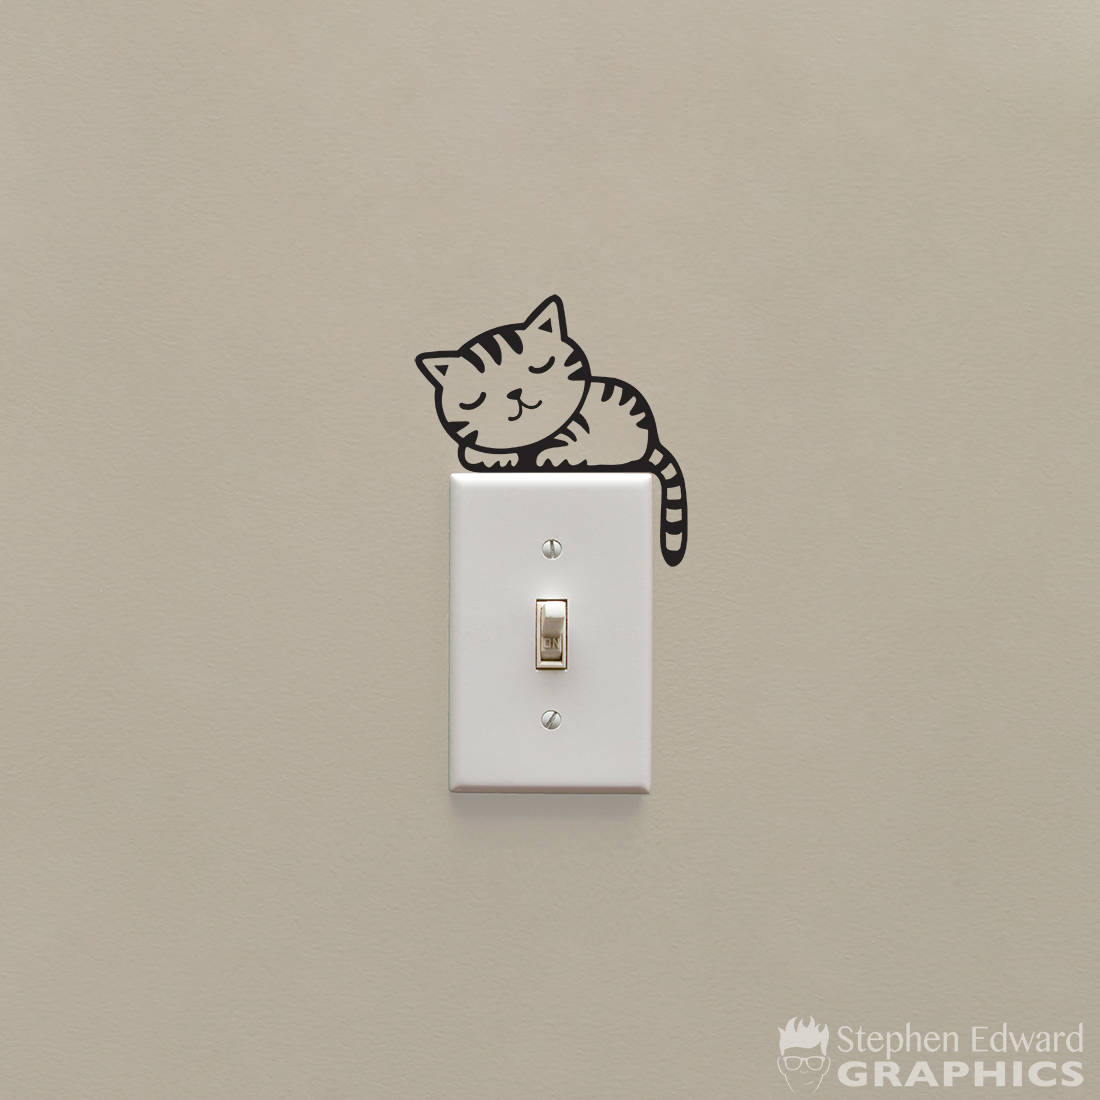 Cat Light Switch Decal - Lightswitch Sleeping Kitten Decal - Light Switch Cover decor